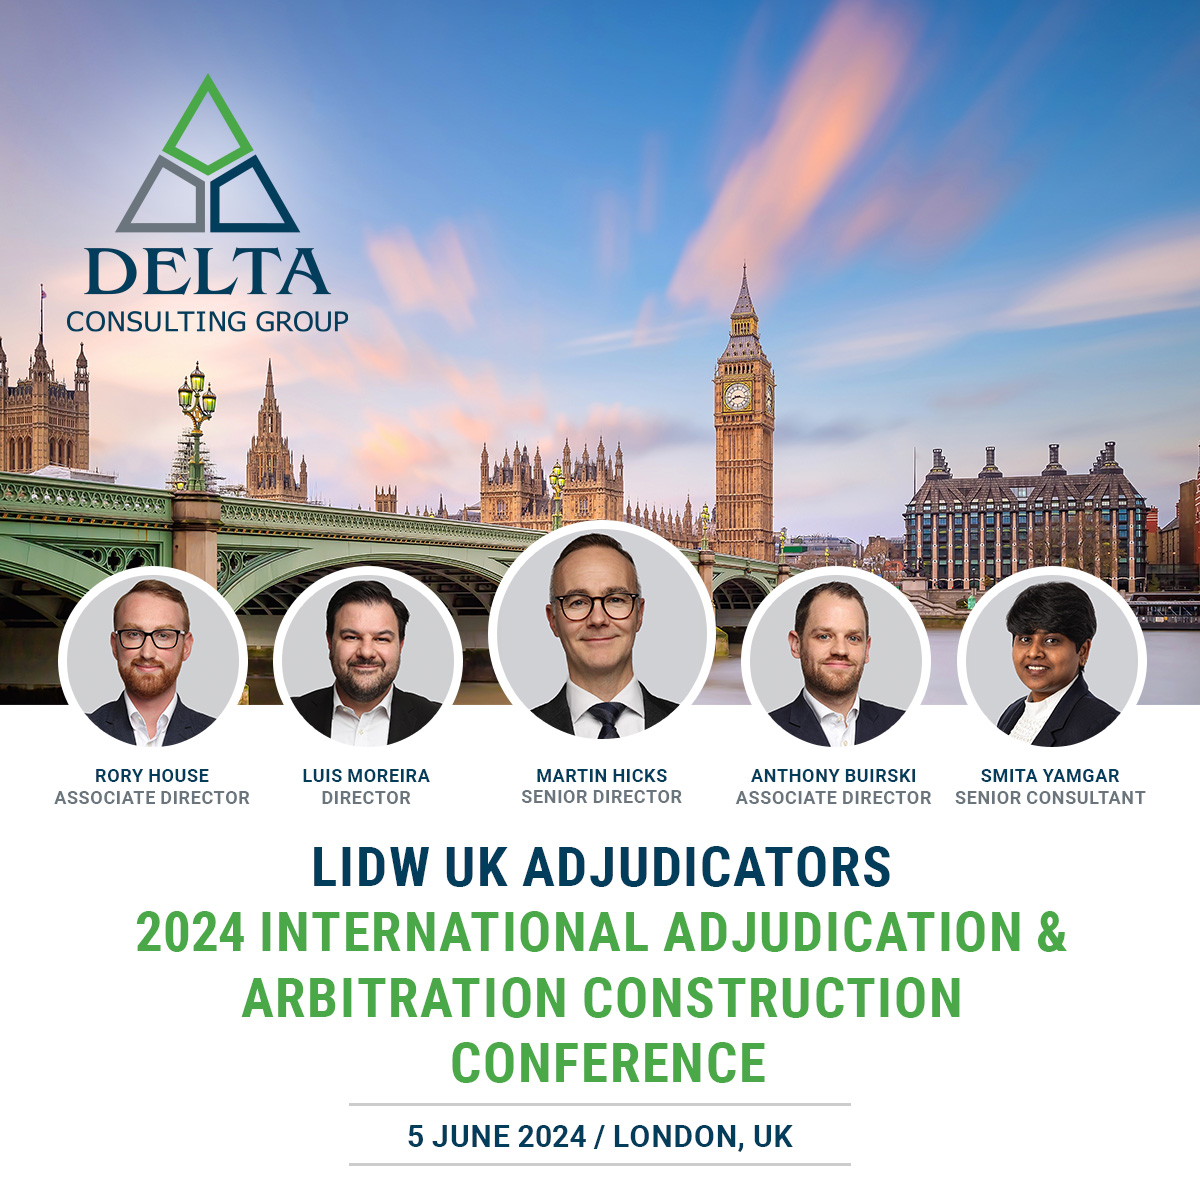 LIDW2024UKAIntlAACConference 3 - Delta Consulting Group